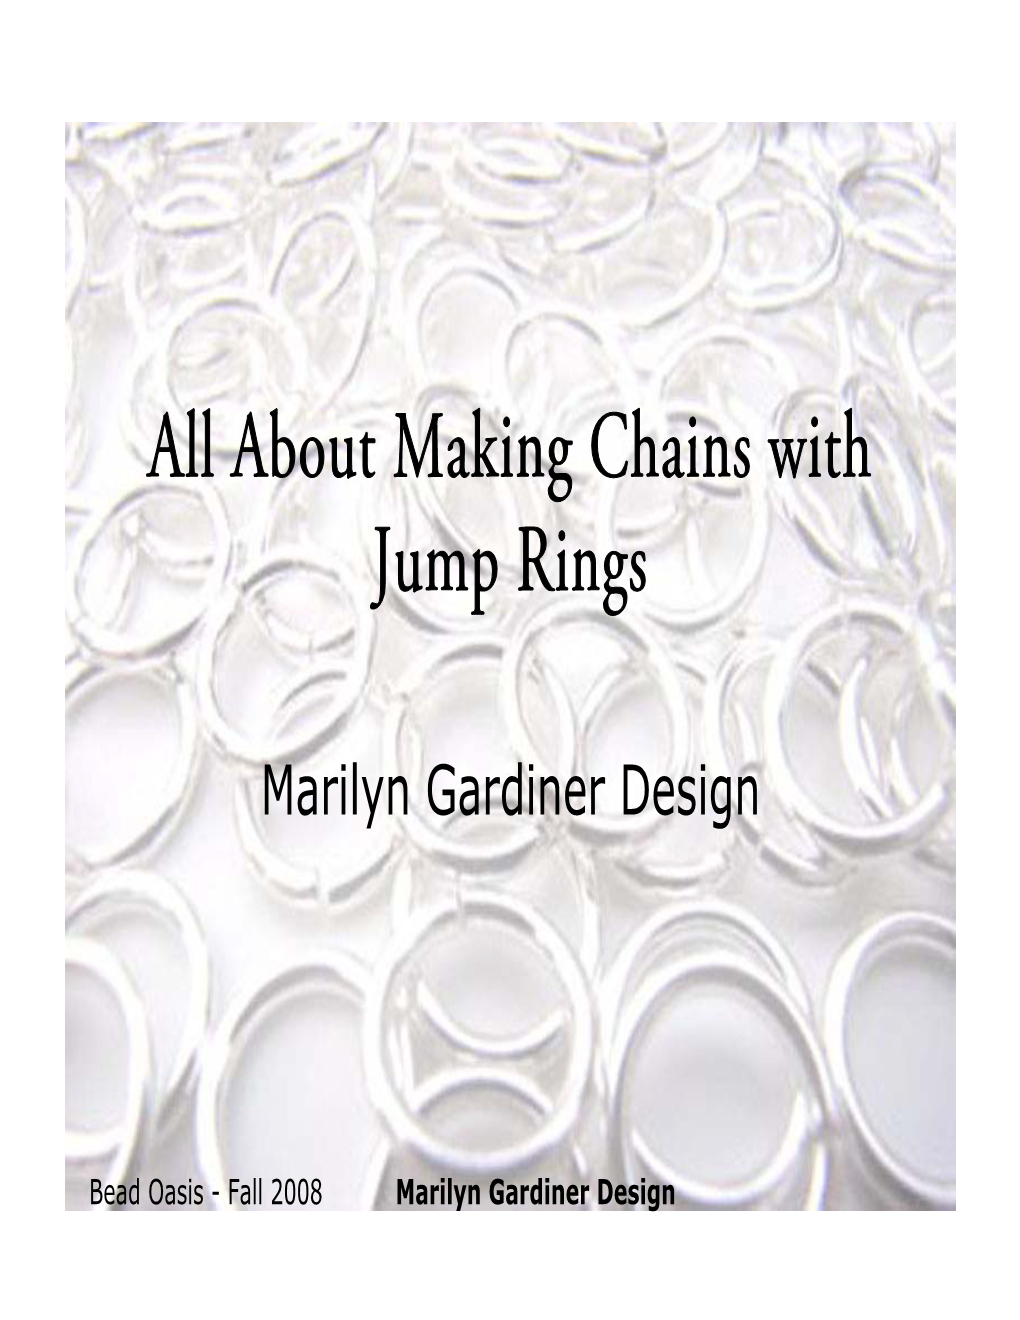 All About Making Chains with Jump Rings